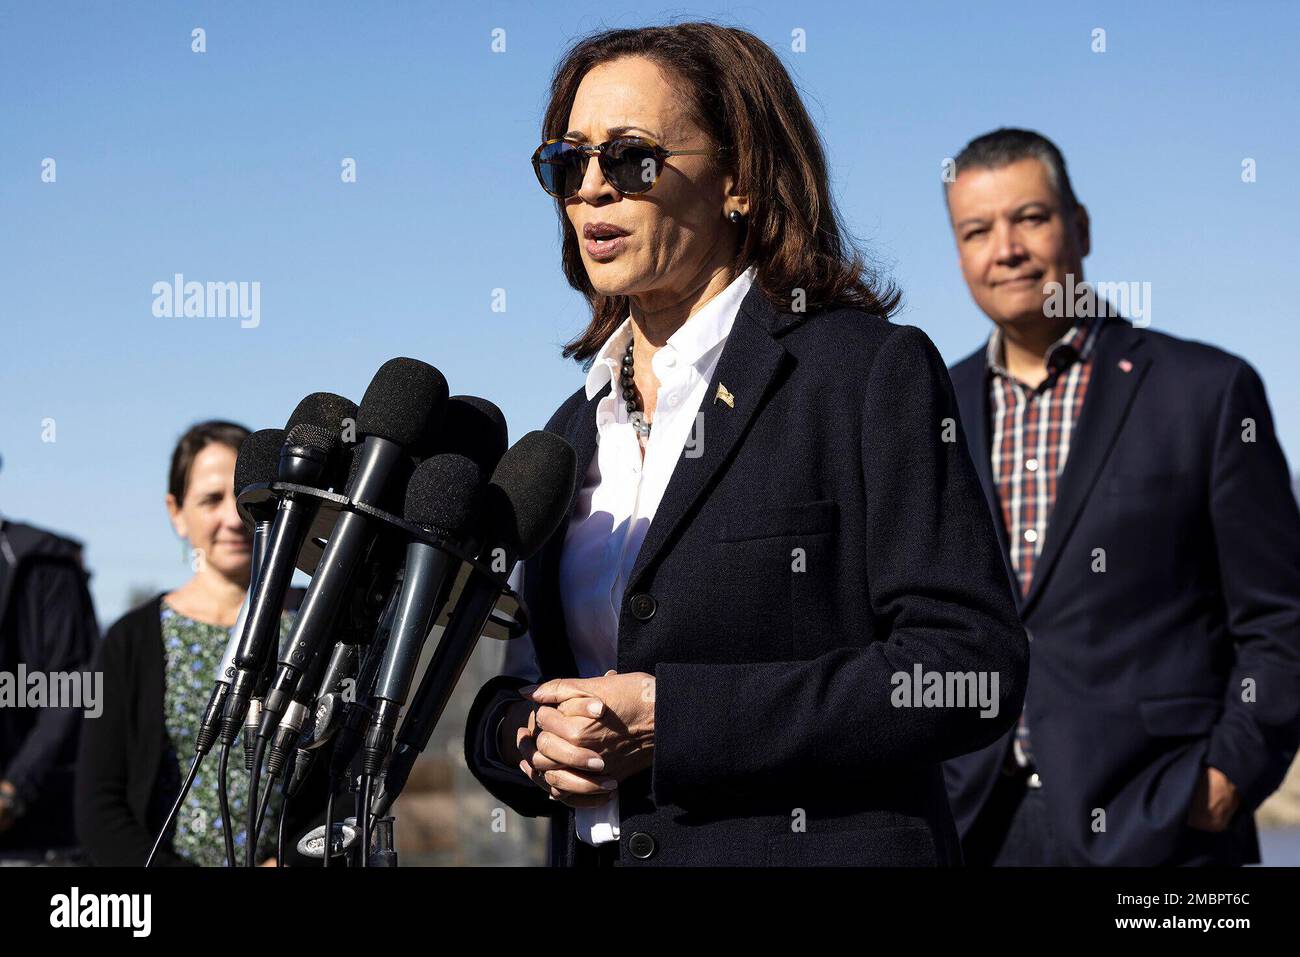 United States Vice President Kamala Harris makes remarks as she tours the Tujunga Spreading Grounds in Sun Valley, California on January 20, 2023. The spreading grounds recharge Los Angeles Countys groundwater. Pictured with the Vice President are: Assistant Secretary Tanya Trujillo, US Department of the Interior; US Senator Alex Padilla (Democrat of California); US Representative Tony Cardenas (Democrat of California); Secretary Wade Crowfoot, California Natural Resources Agency; Lindsey Horvath, Los Angeles County Board of Supervisors; and Director Mark Pestrella, Los Angeles County Public  Stock Photo